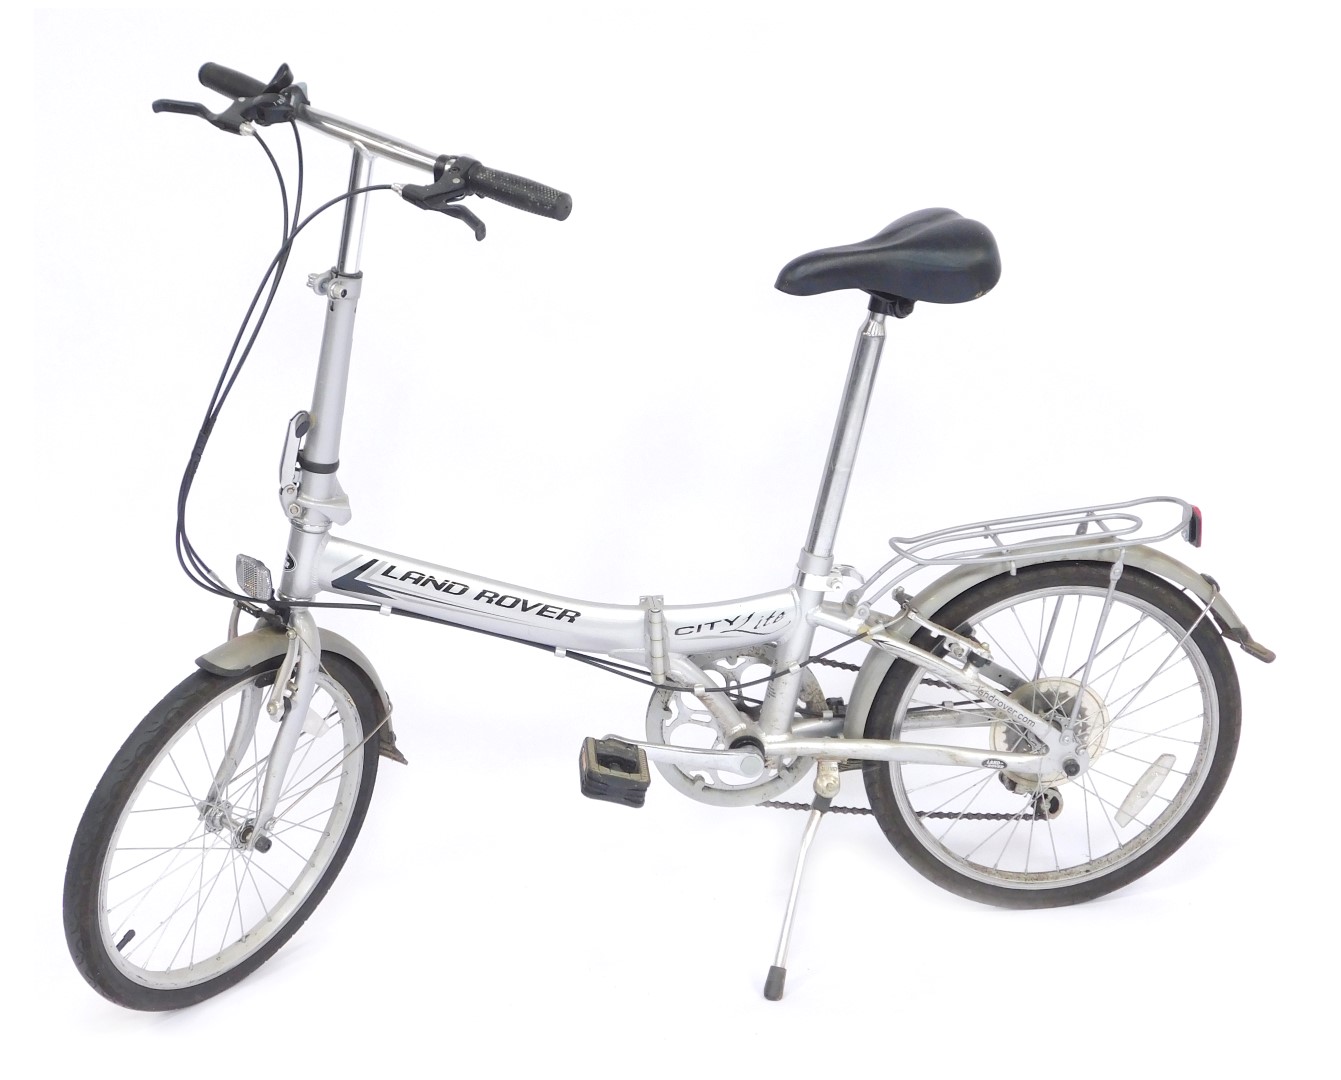 A City Lite Land Rover folding bicycle.